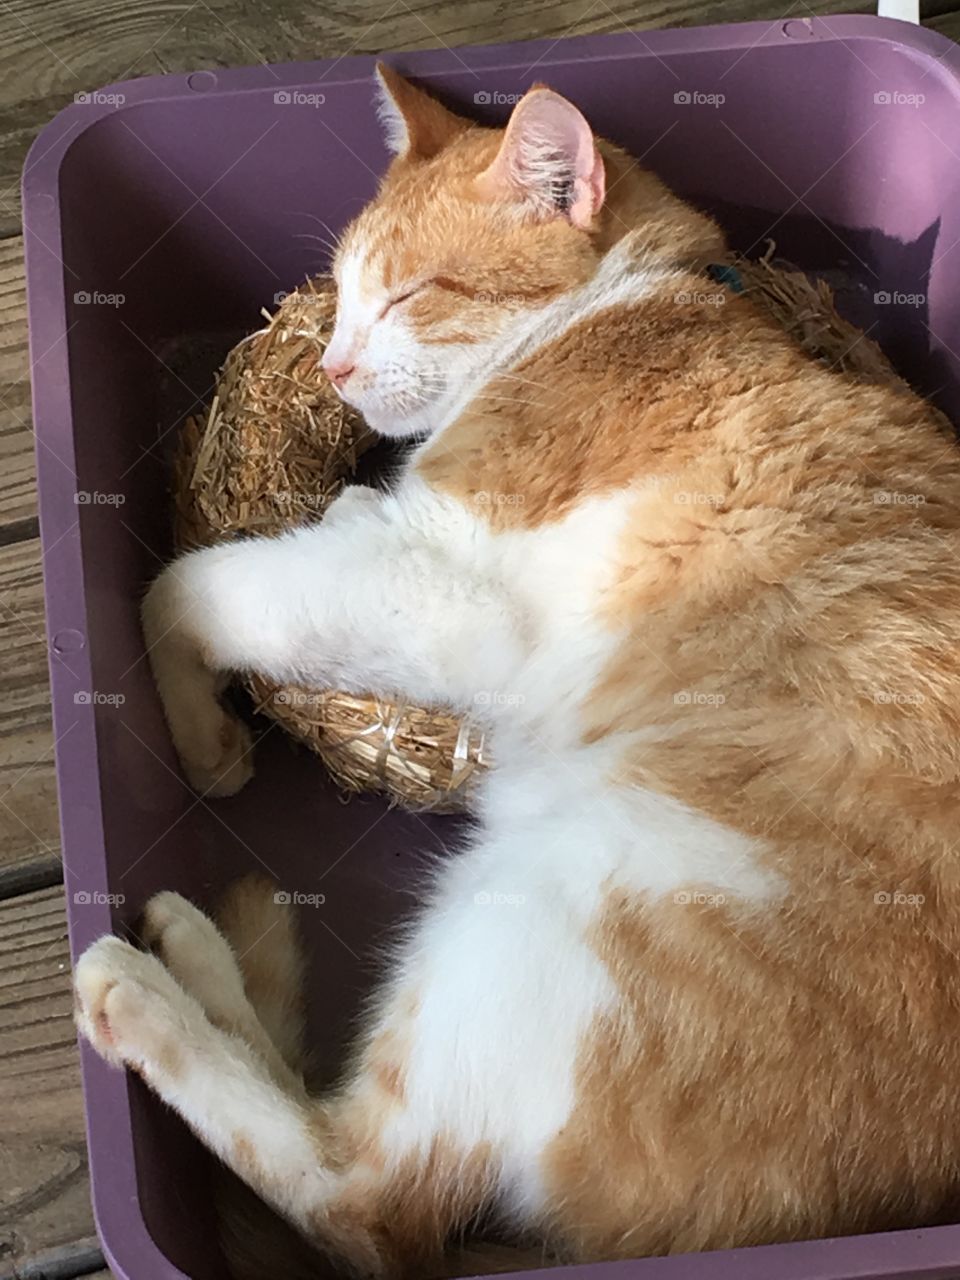 Baby boy sleeping in a clean litter box with a straw wreath as his pillow, just snoozing!